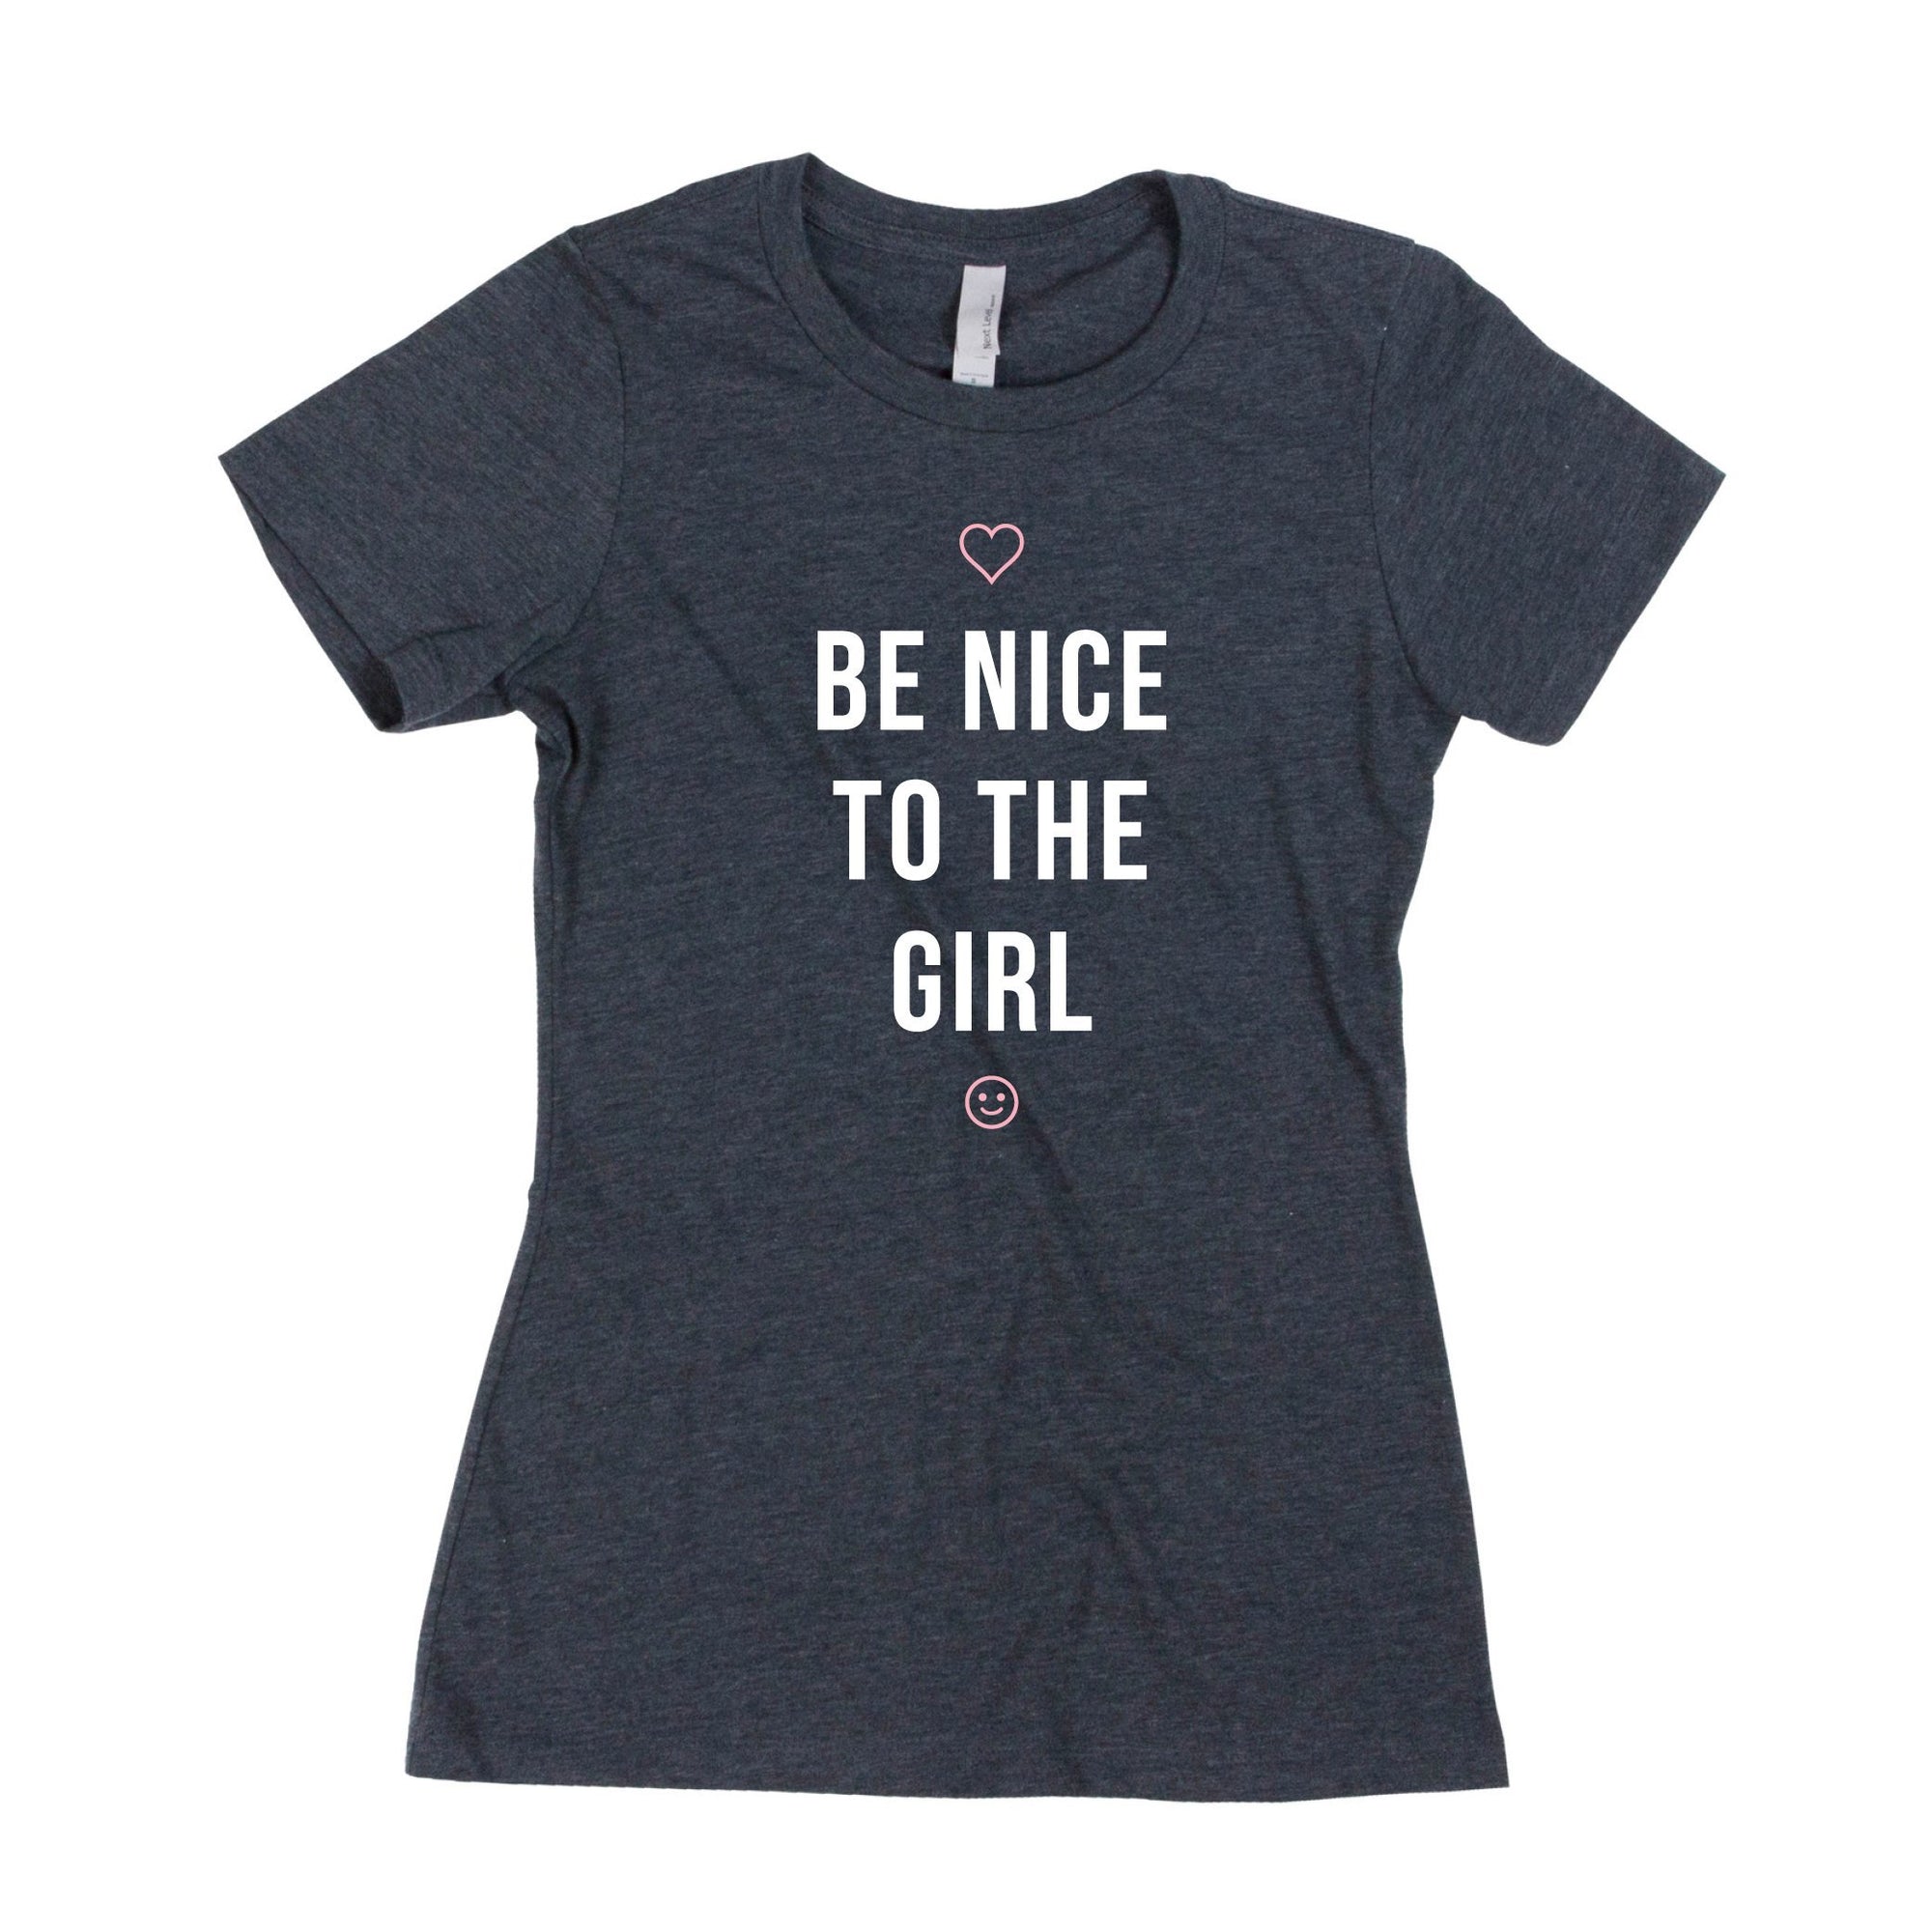 Be Nice to the Girl T-Shirt - Laugh Your Way Store